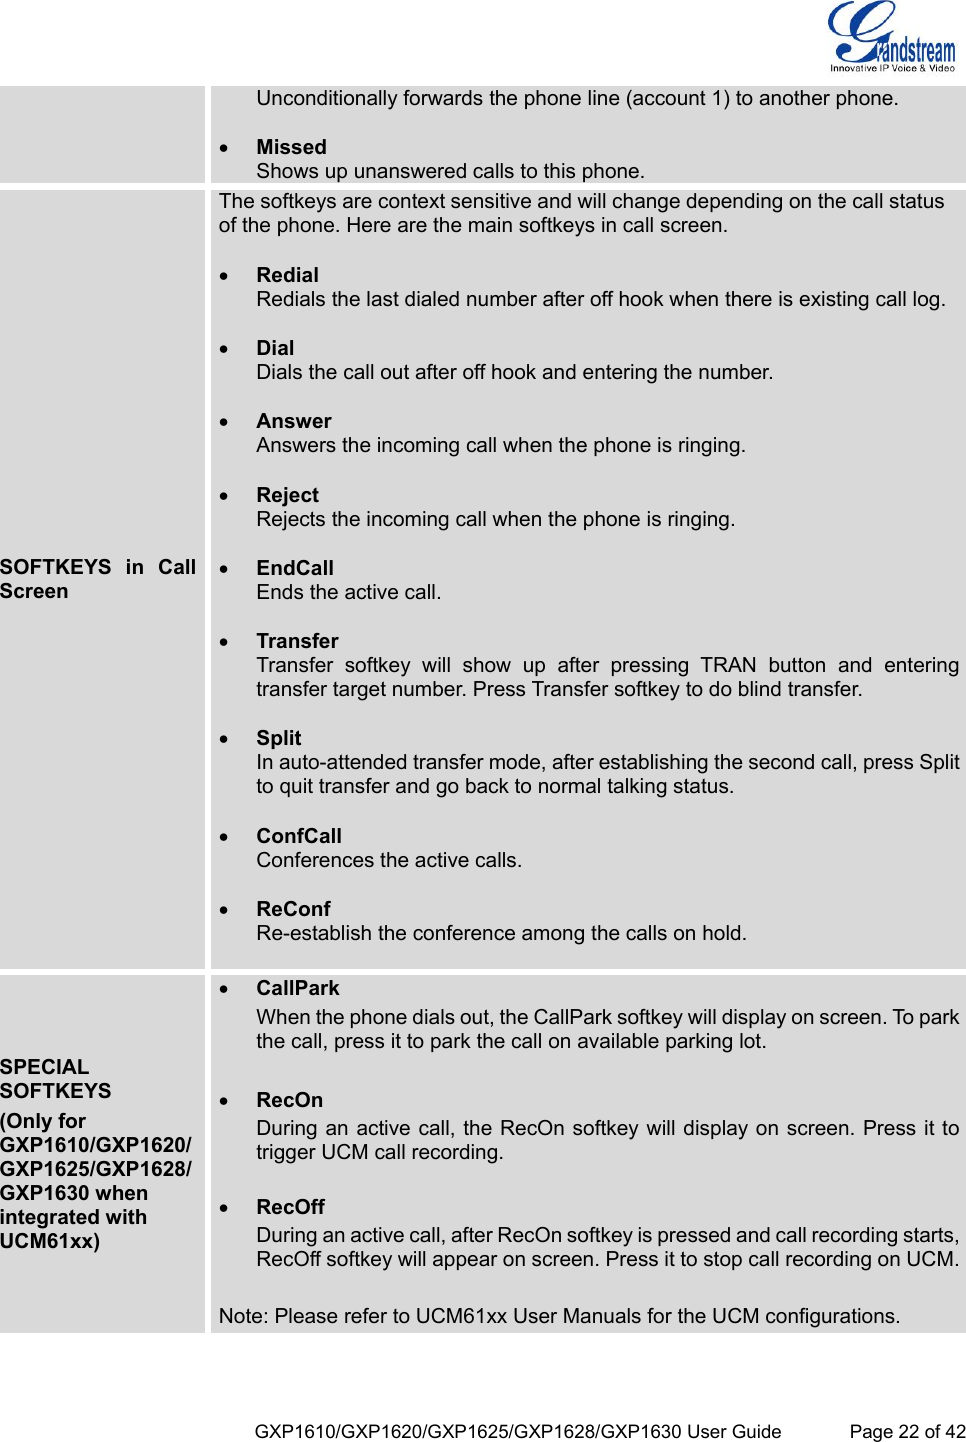  GXP1610/GXP1620/GXP1625/GXP1628/GXP1630 User Guide             Page 22 of 42 Unconditionally forwards the phone line (account 1) to another phone.   Missed Shows up unanswered calls to this phone. SOFTKEYS  in  Call Screen The softkeys are context sensitive and will change depending on the call status of the phone. Here are the main softkeys in call screen.   Redial Redials the last dialed number after off hook when there is existing call log.   Dial Dials the call out after off hook and entering the number.   Answer Answers the incoming call when the phone is ringing.   Reject Rejects the incoming call when the phone is ringing.   EndCall Ends the active call.   Transfer Transfer  softkey  will  show  up  after  pressing  TRAN  button  and  entering transfer target number. Press Transfer softkey to do blind transfer.   Split In auto-attended transfer mode, after establishing the second call, press Split to quit transfer and go back to normal talking status.   ConfCall Conferences the active calls.   ReConf Re-establish the conference among the calls on hold.  SPECIAL SOFTKEYS (Only for GXP1610/GXP1620/GXP1625/GXP1628/GXP1630 when integrated with UCM61xx)  CallPark When the phone dials out, the CallPark softkey will display on screen. To park the call, press it to park the call on available parking lot.   RecOn During an active call, the RecOn softkey will display on screen. Press it to trigger UCM call recording.    RecOff During an active call, after RecOn softkey is pressed and call recording starts, RecOff softkey will appear on screen. Press it to stop call recording on UCM.  Note: Please refer to UCM61xx User Manuals for the UCM configurations.   